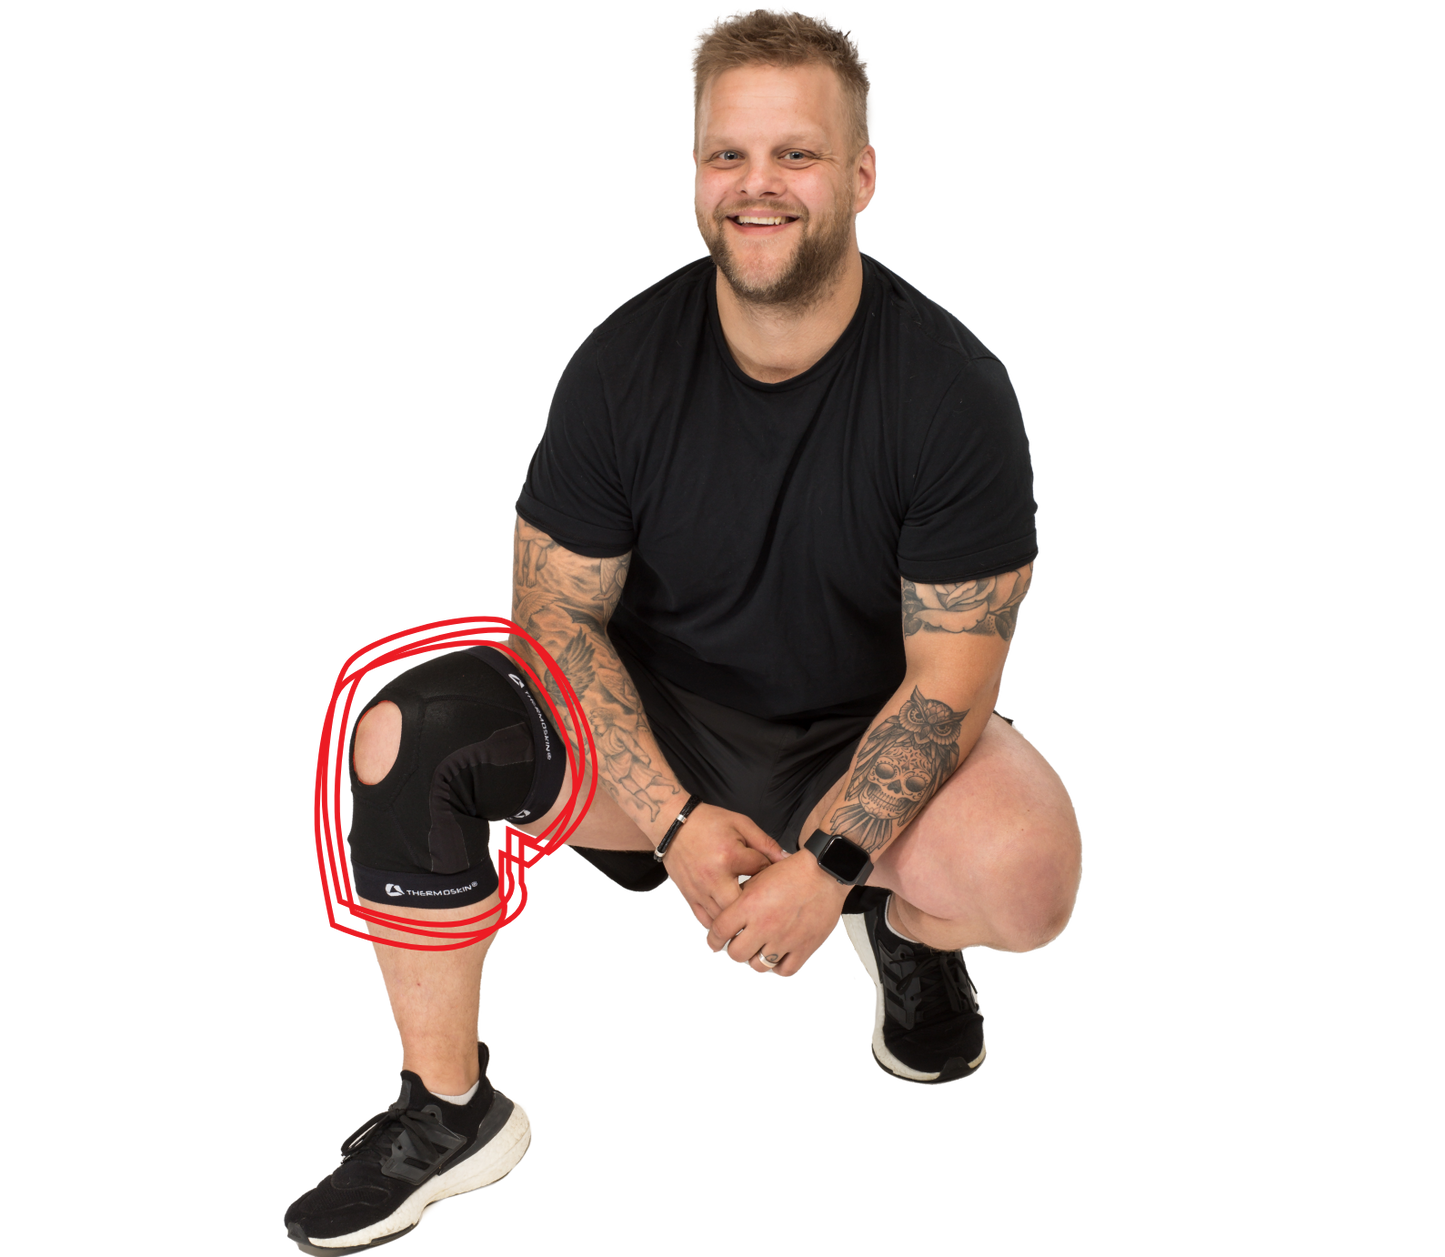 THERMOSKIN Thermal Thigh/Hamstring Support small – John Bell & Croyden